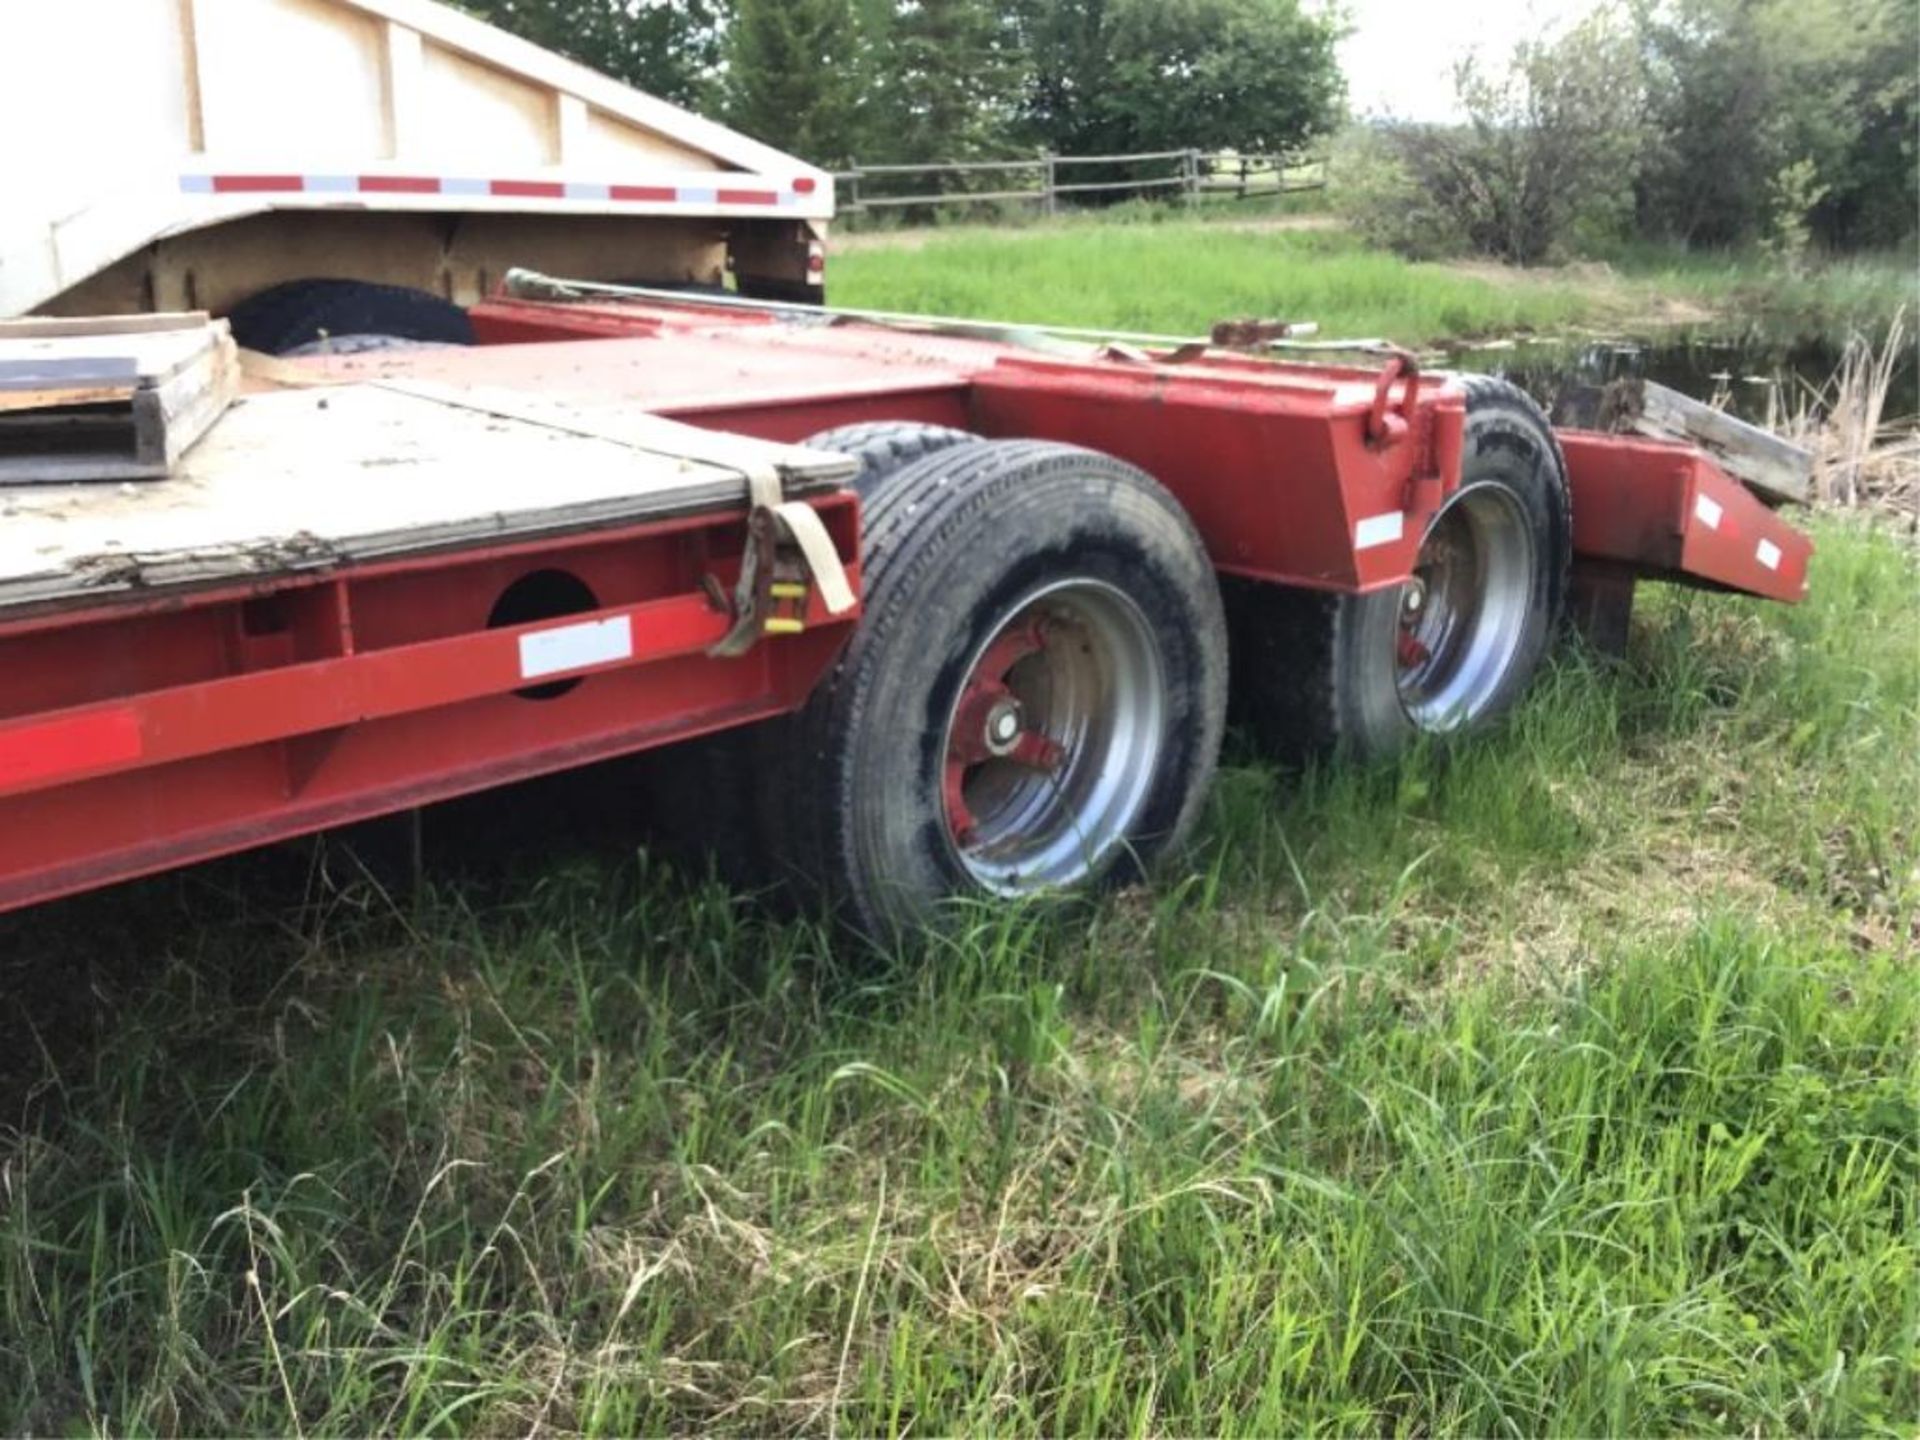 1979 Columbia 40-Ton T/A 40Ft Low Bed Trailer VIN ROL7498809 11R22.5 Tires, Spring Susp, 10Ft Wide - Image 5 of 7